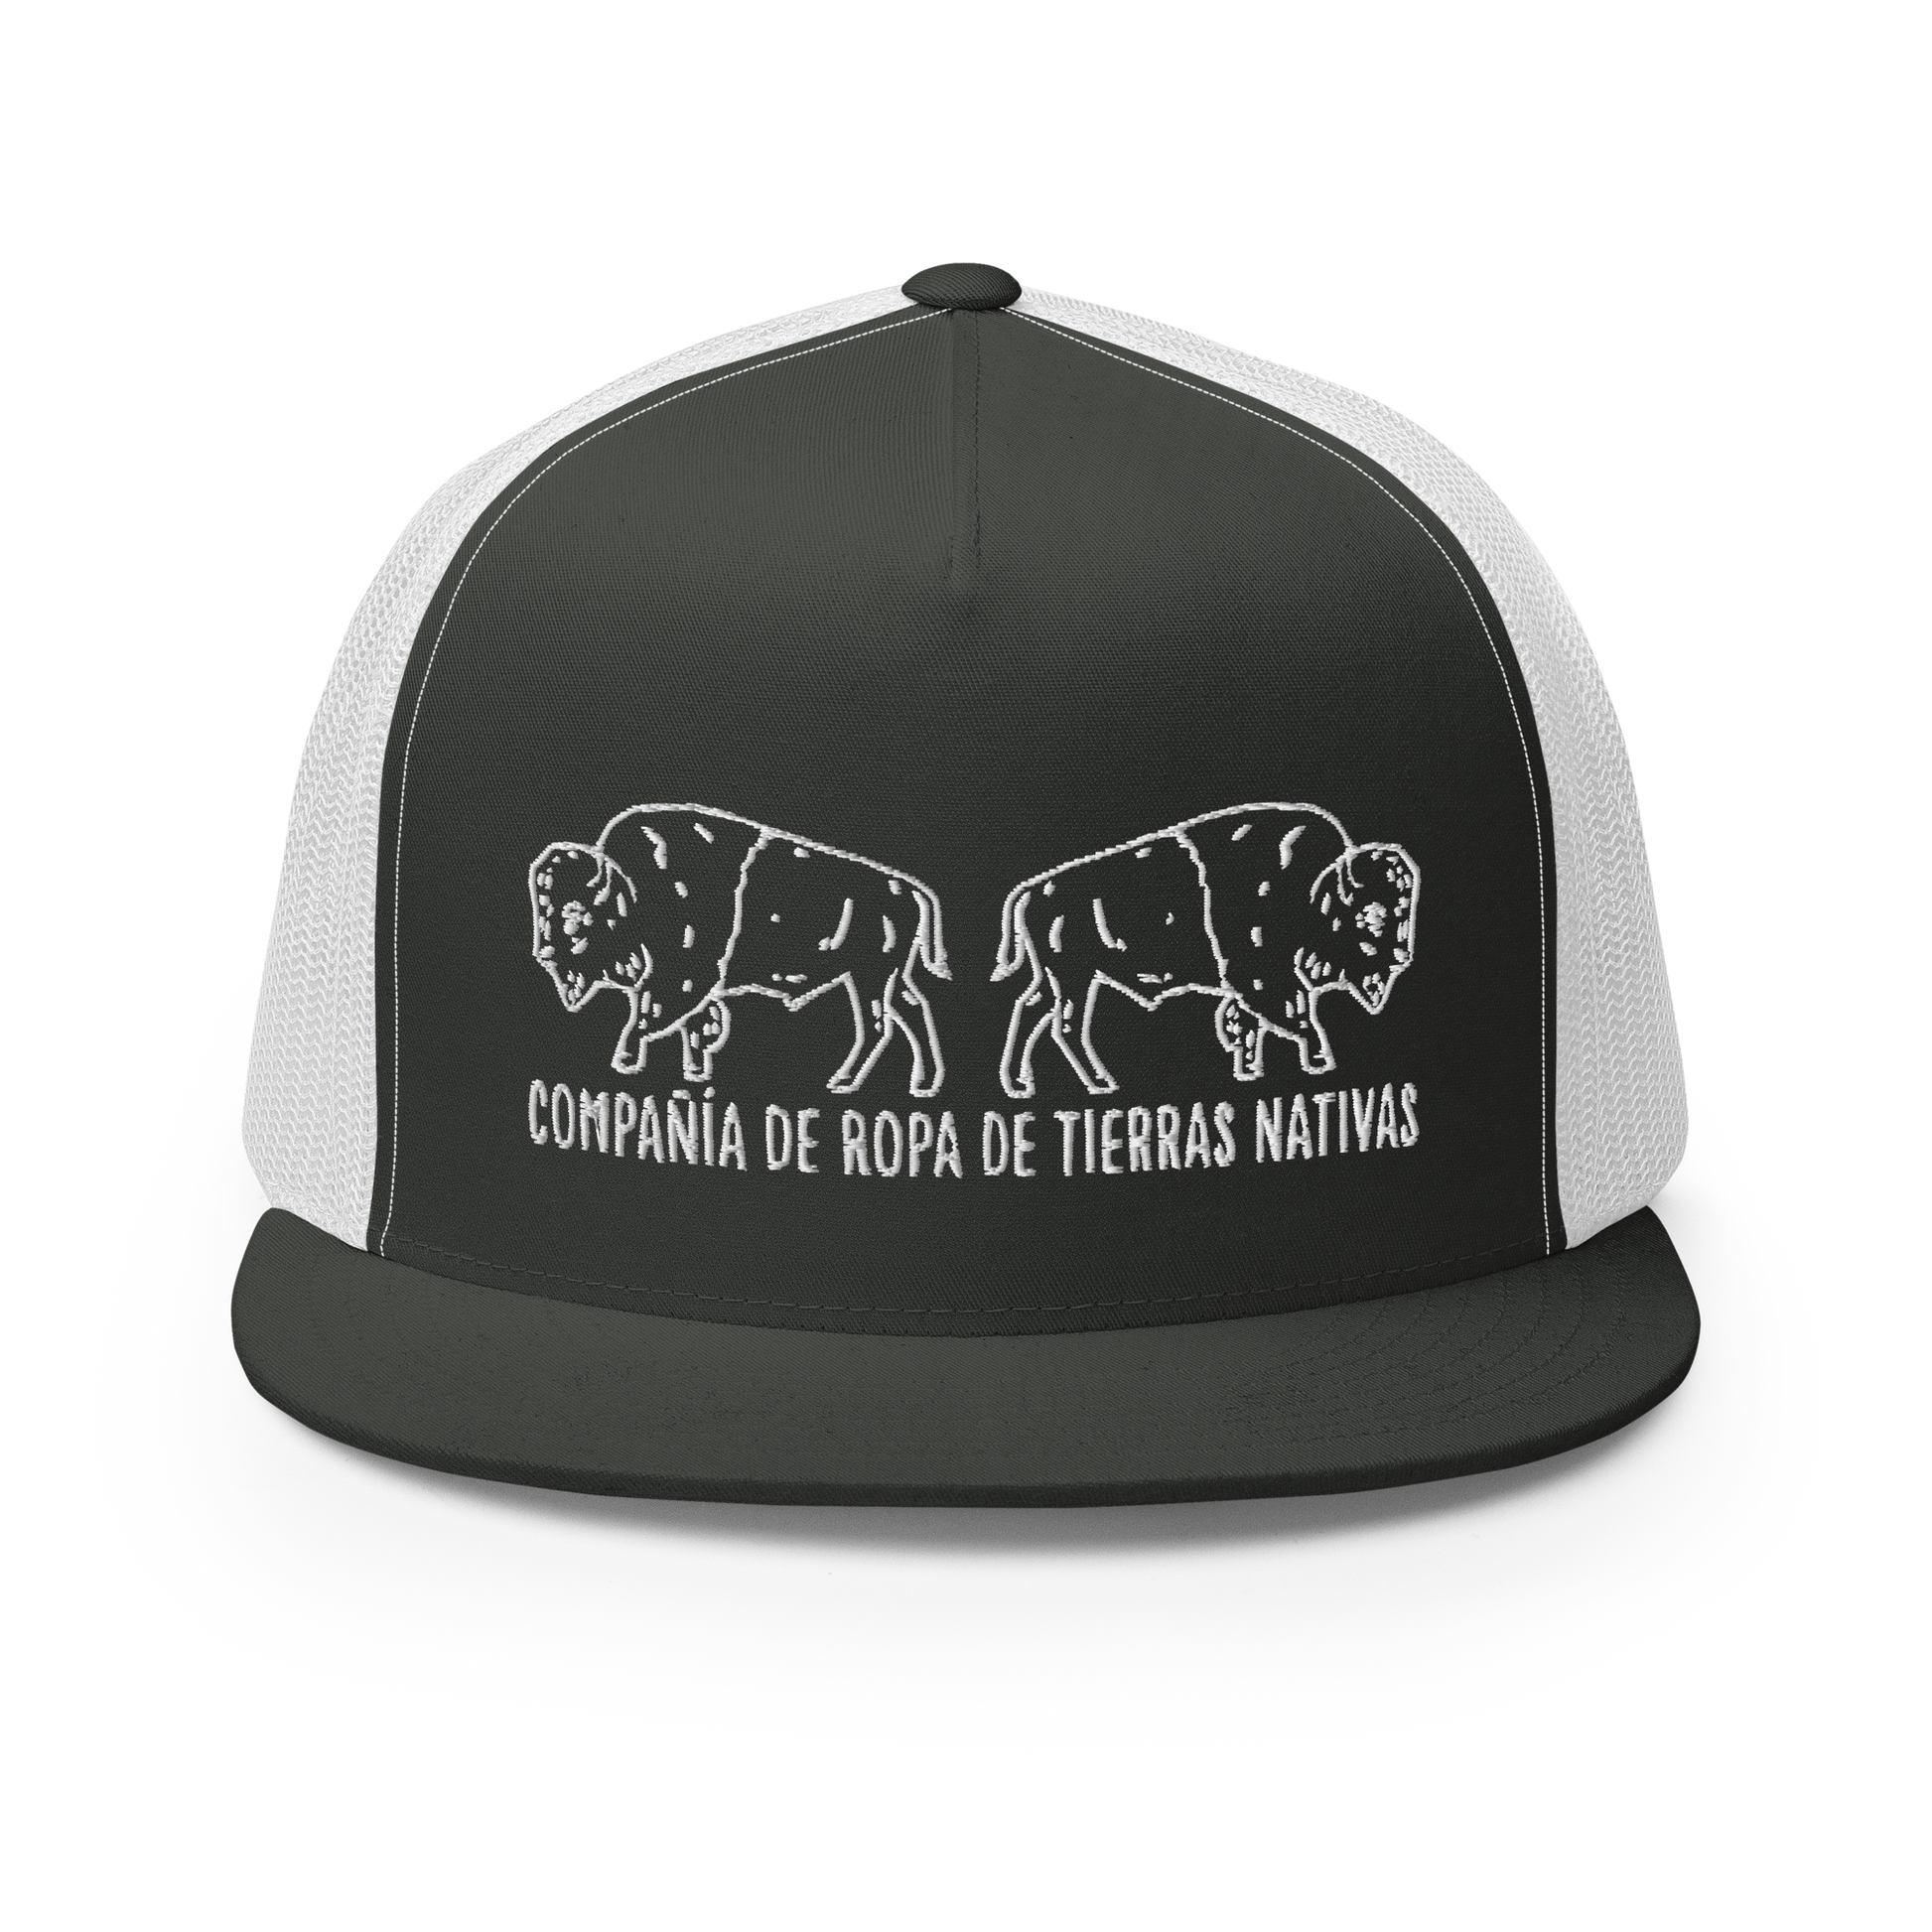 Bison Snapback Hat ESPANOL Embroidered Native American Native Lands Clothing Company